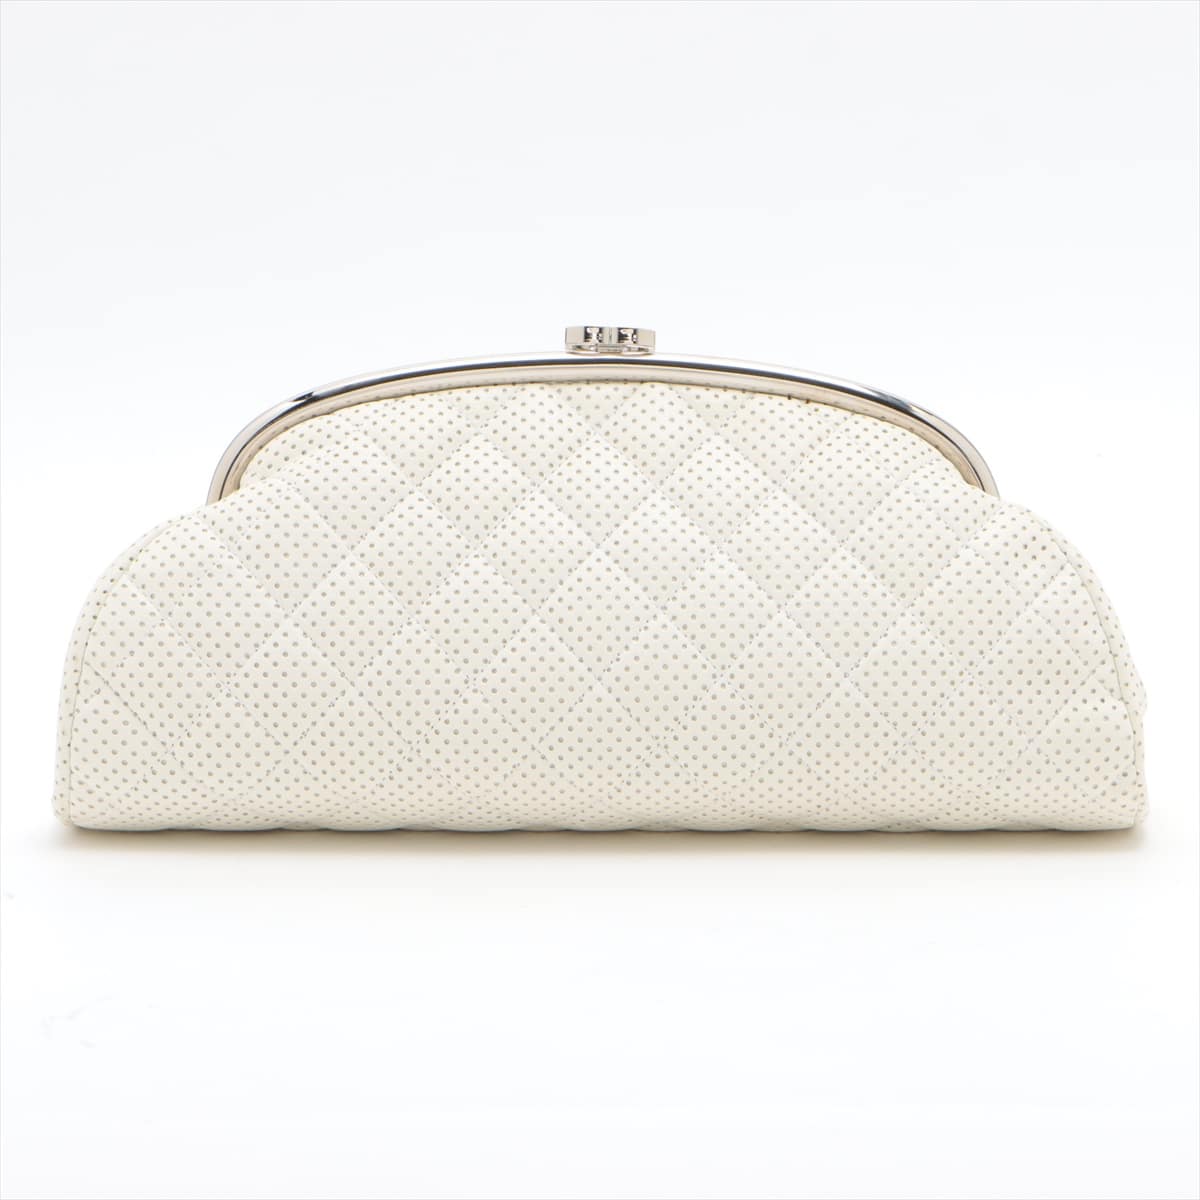 Chanel Coco Mark Punching leather Clutch bag Gamaguchi  White Silver Metal fittings 11XXXXXX